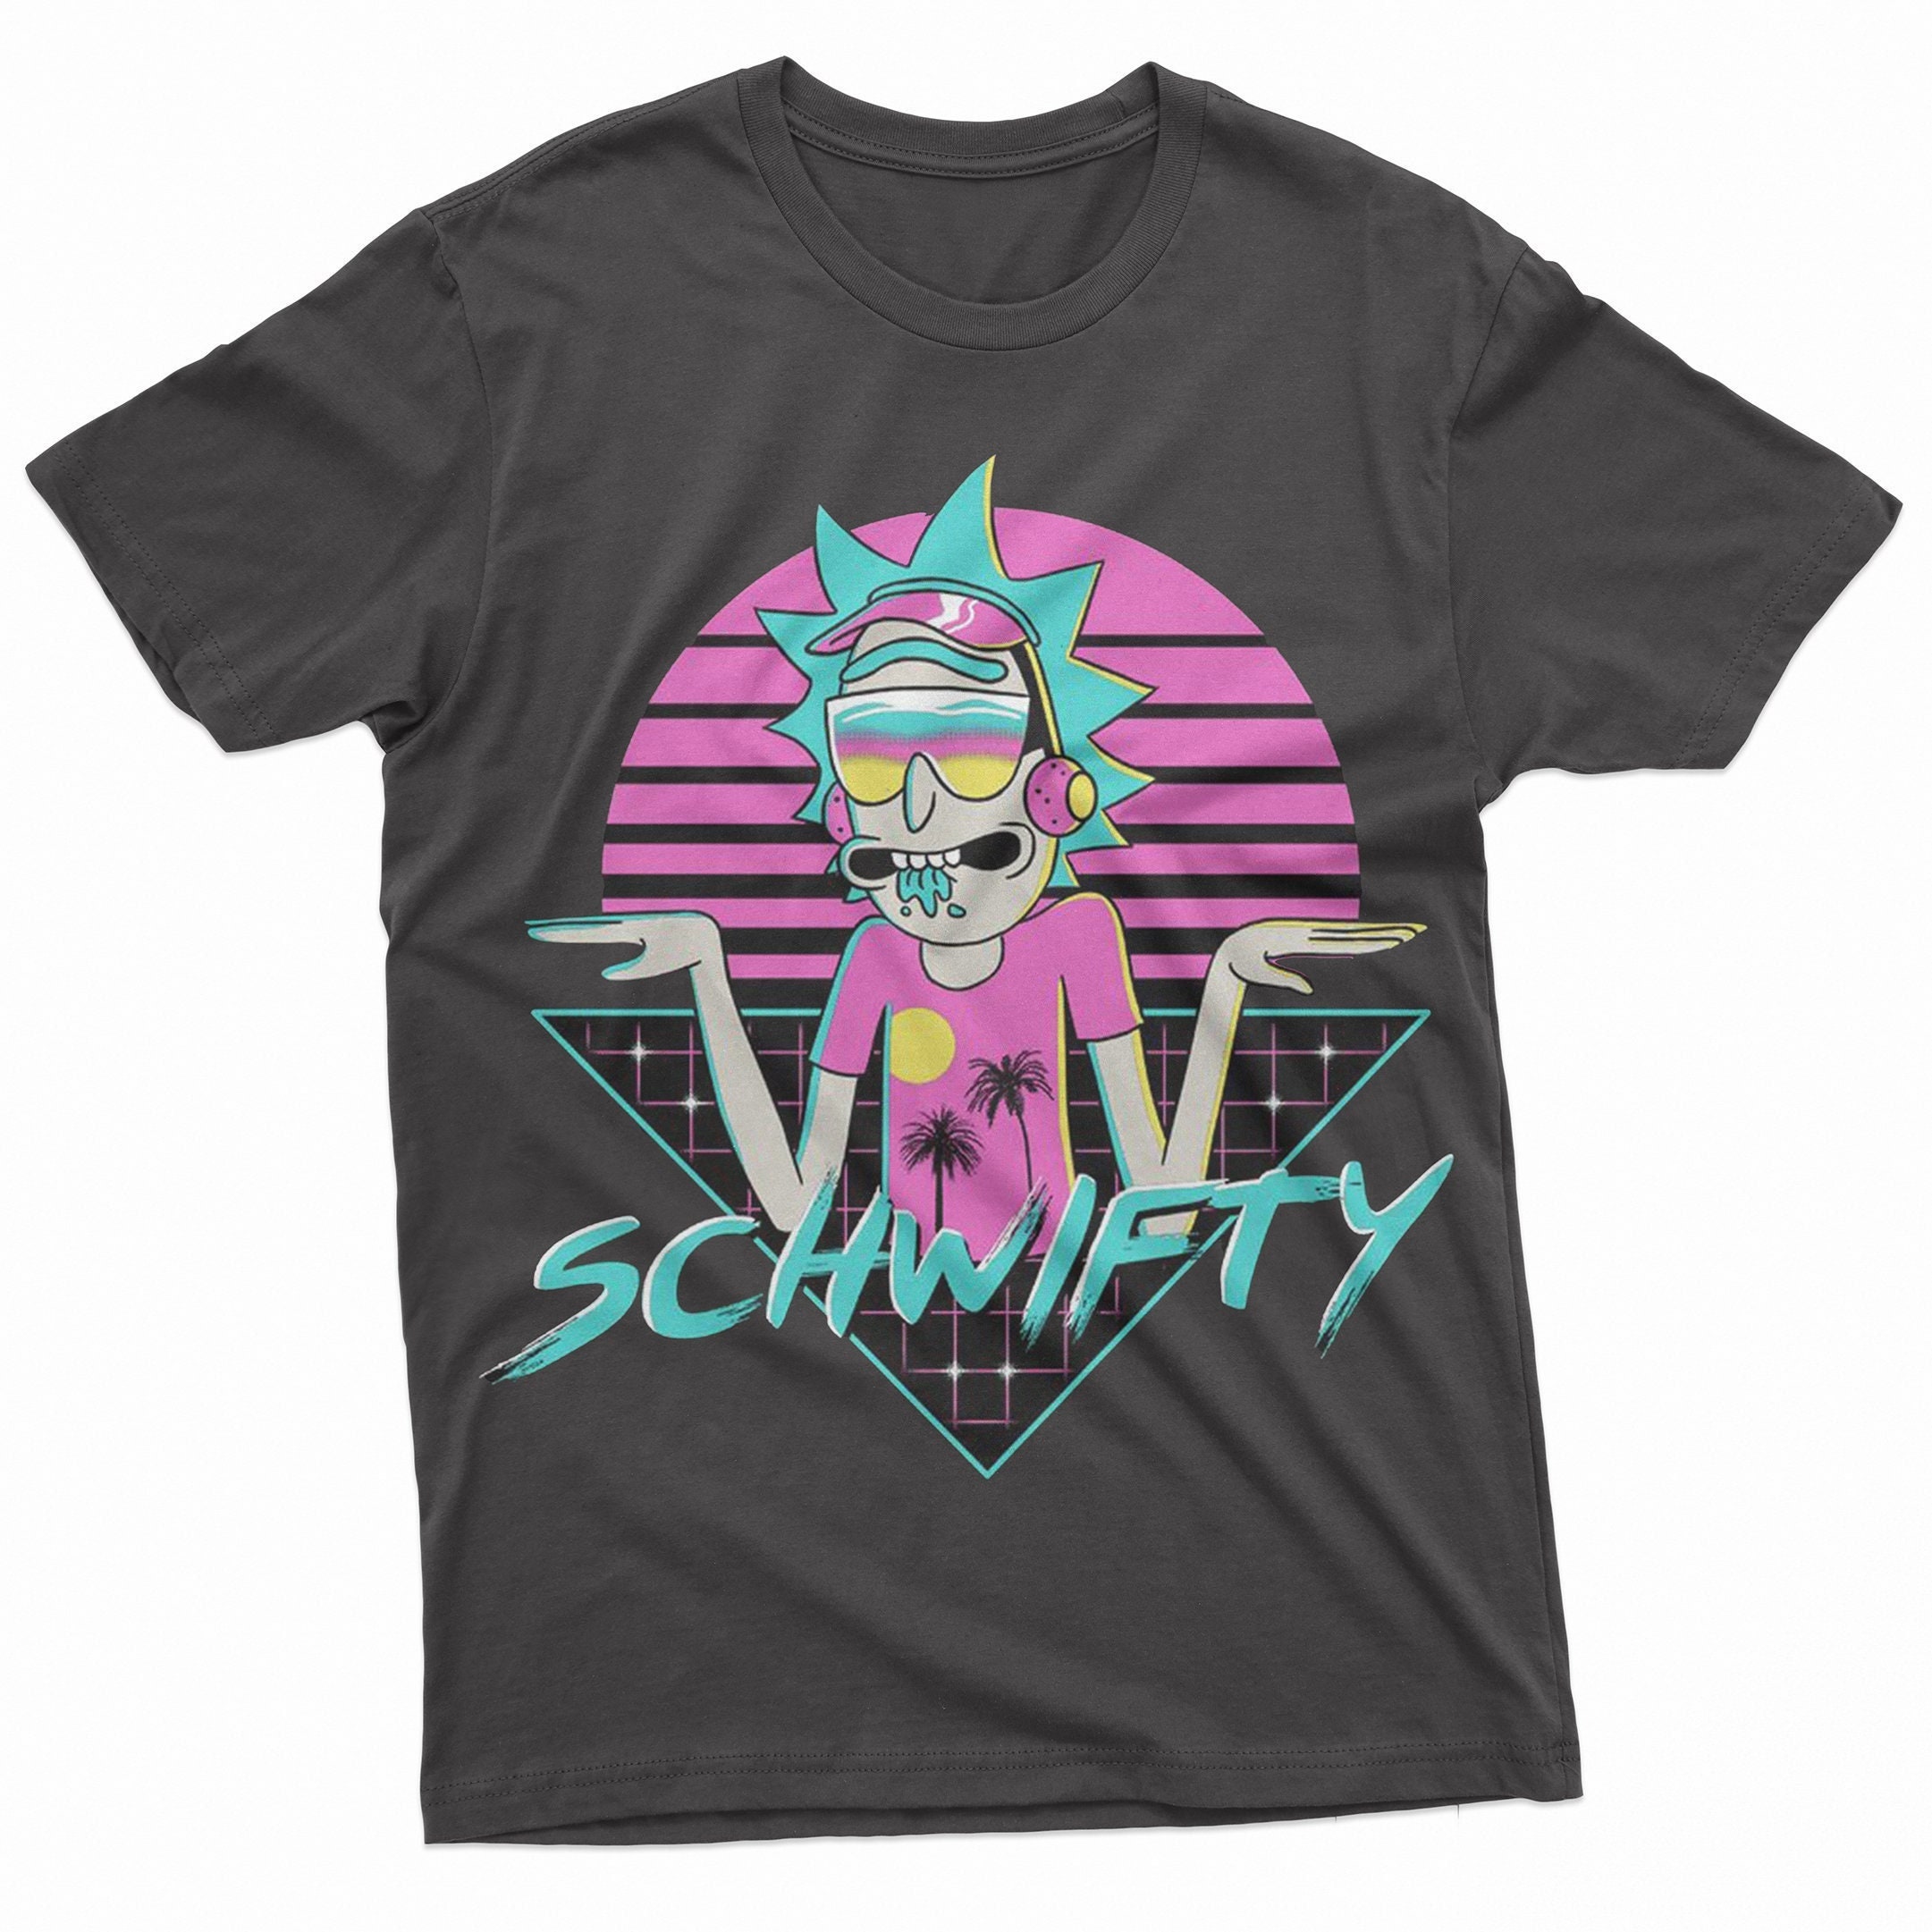 Jordan Poole Party Funny Rick And Morty Inspired Shirt, hoodie